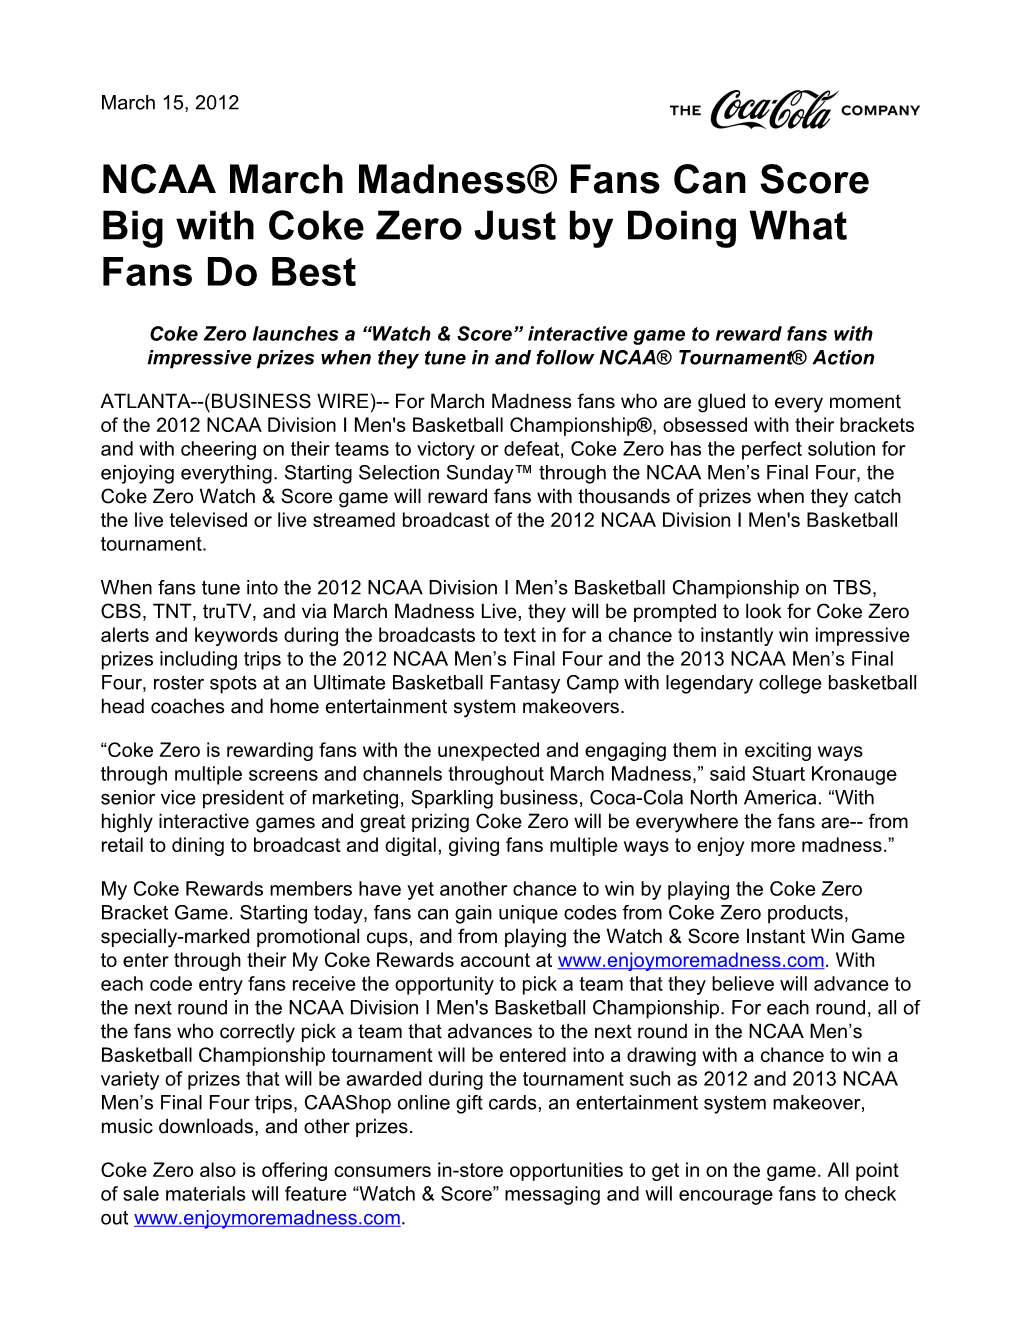 NCAA March Madness® Fans Can Score Big with Coke Zero Just by Doing What Fans Do Best